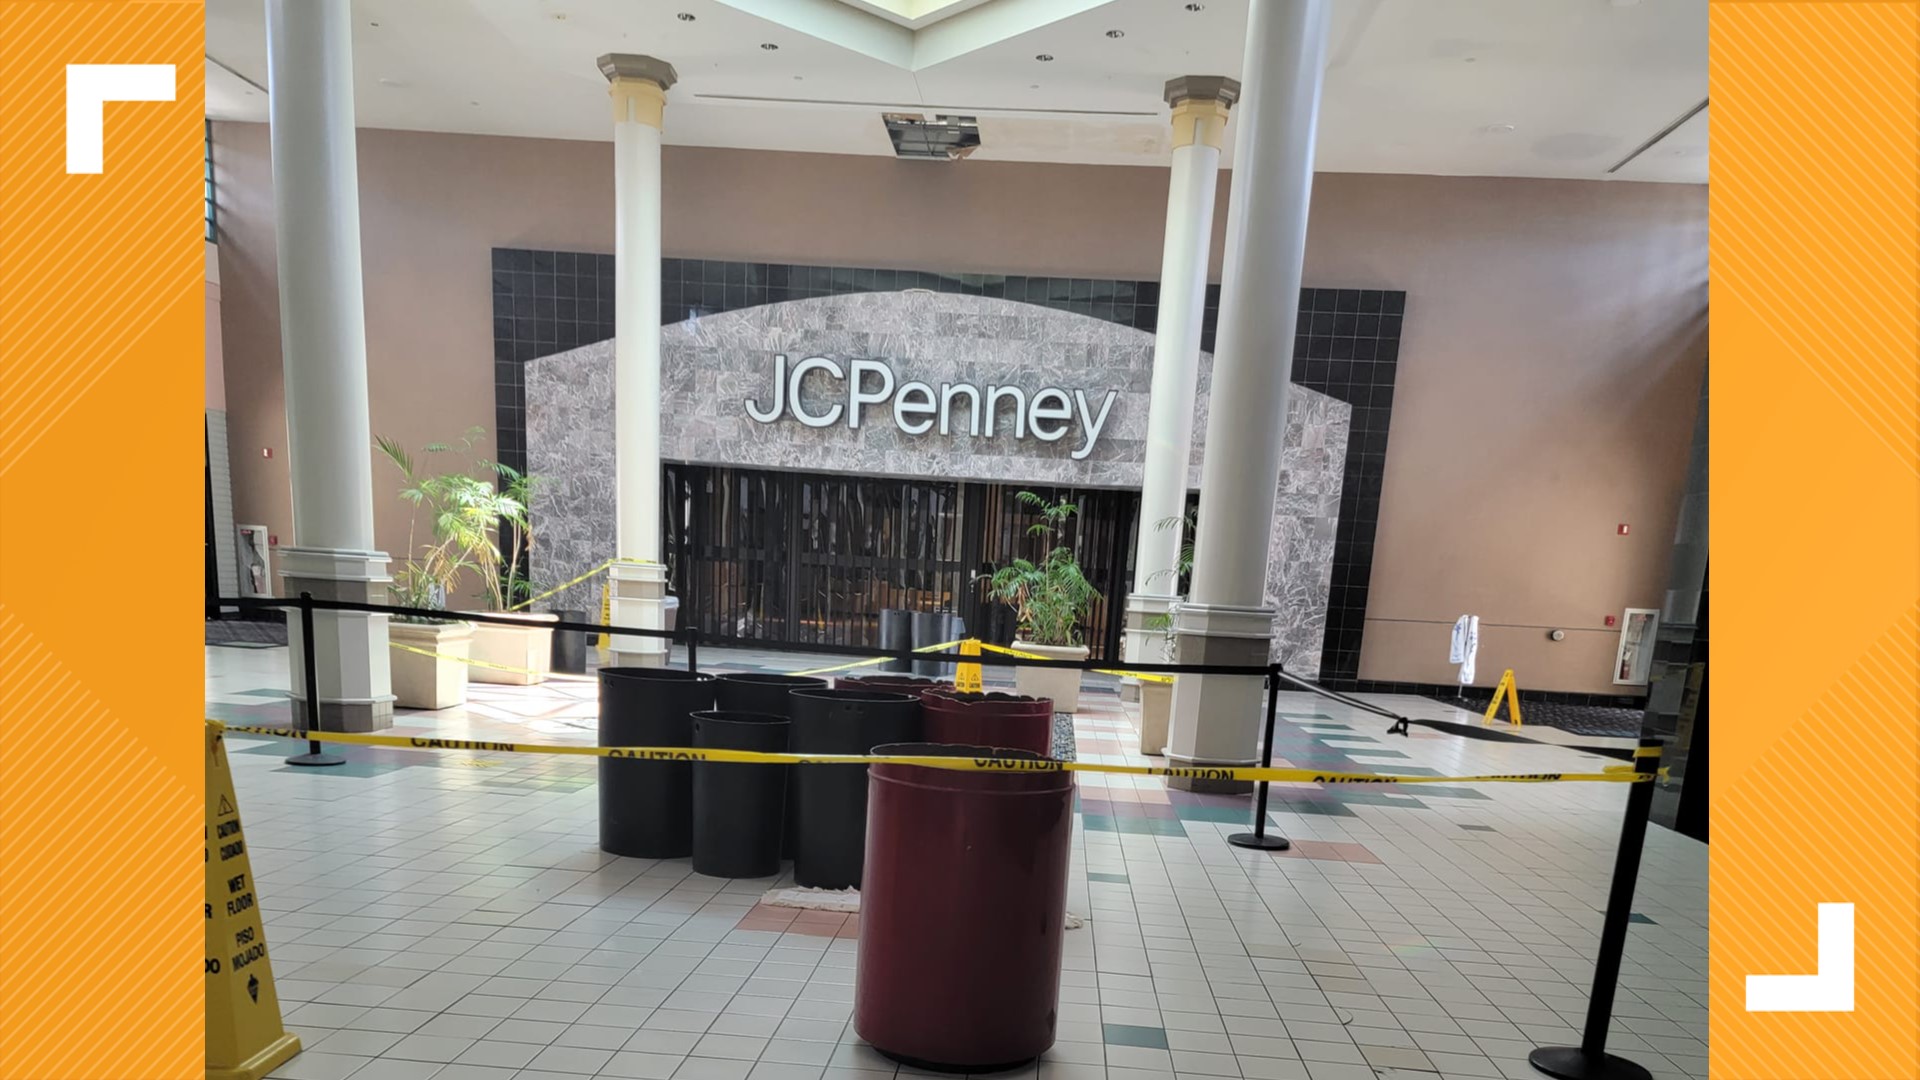 Andrew Mayorga shot these photos inside Regency Square Mall. He wanted to see if the rumors were true.